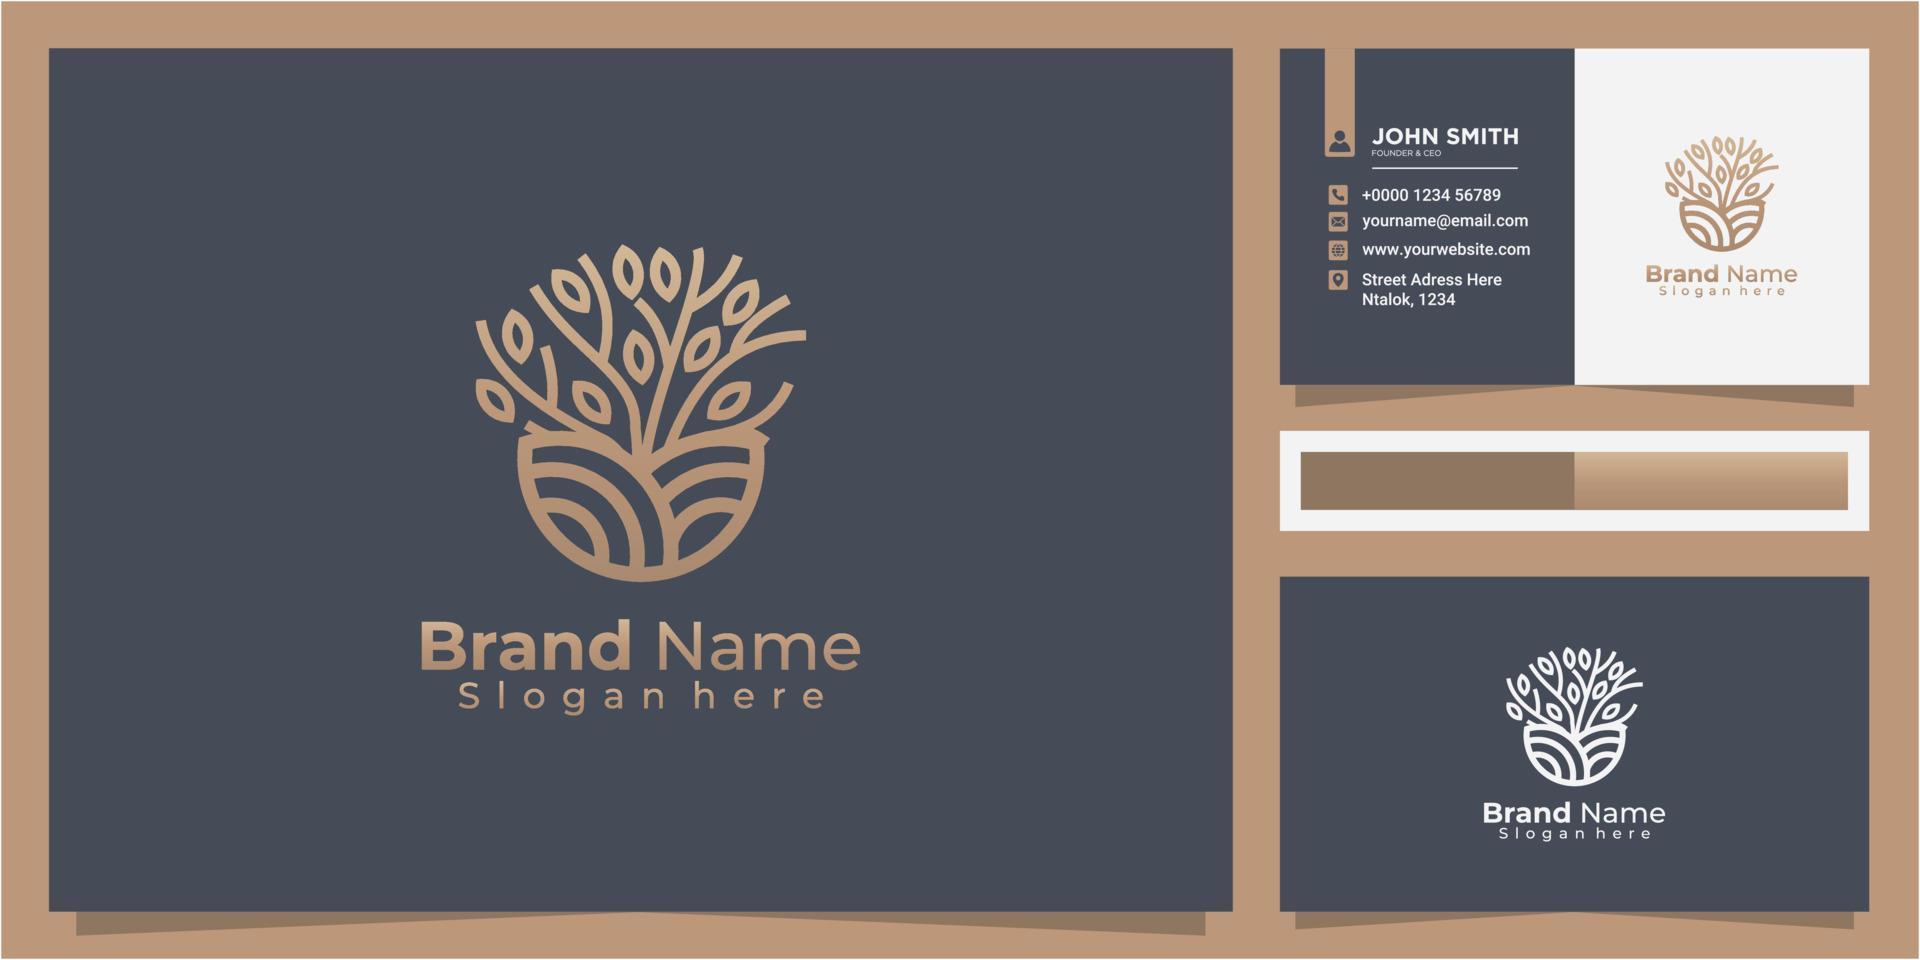 elegant land and line art tree logo design inspiration with business card vector